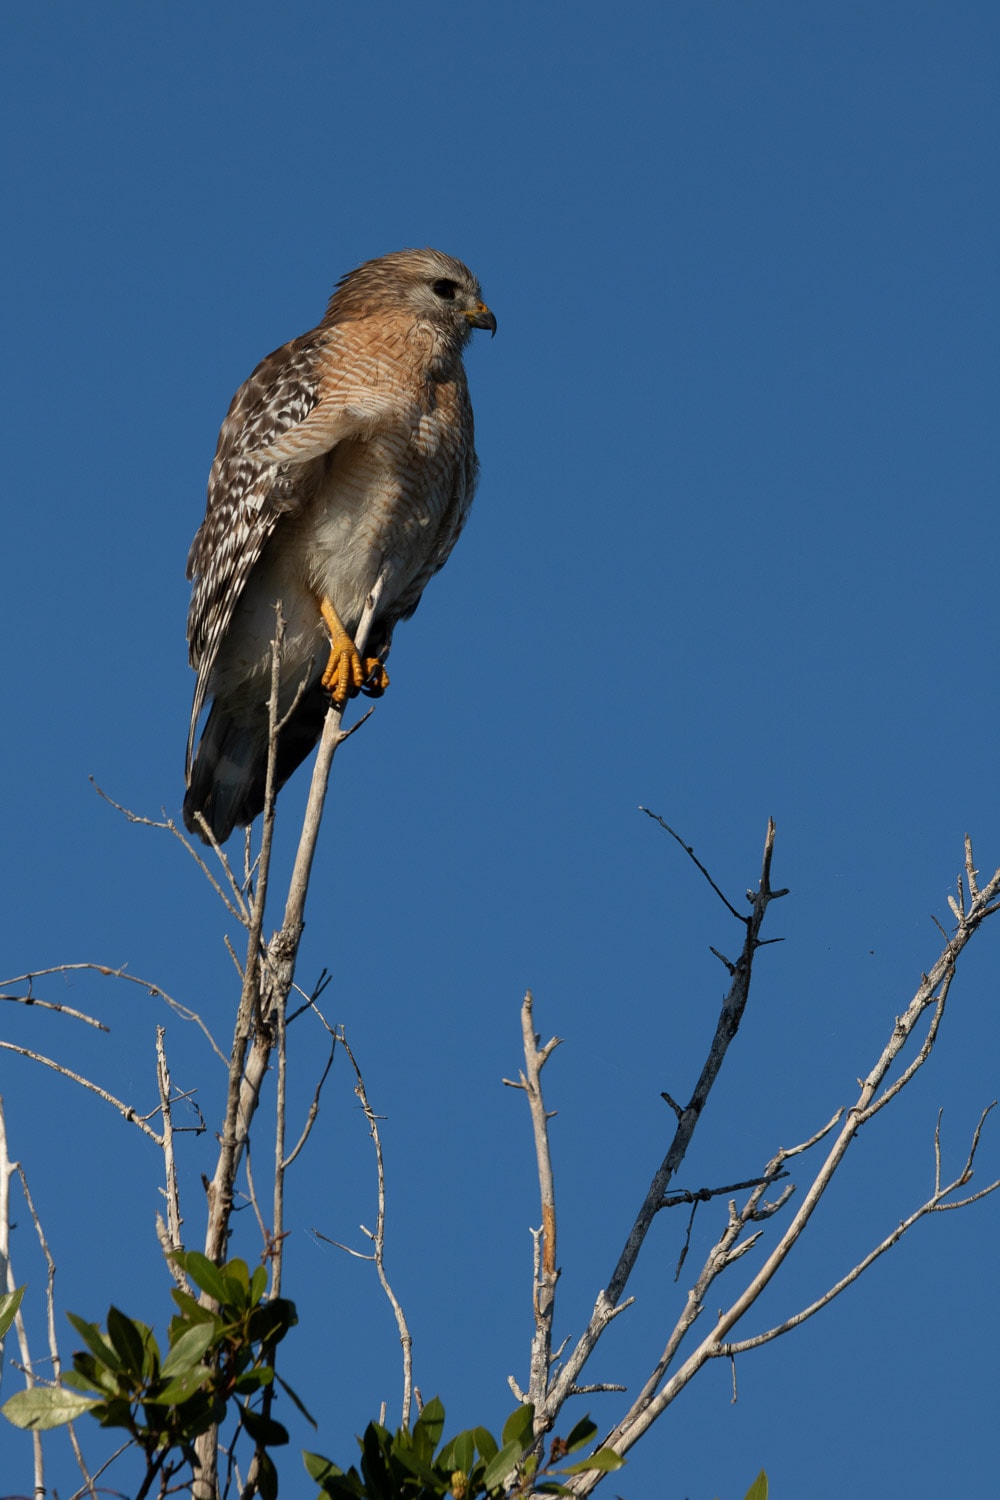 A red-shouldered hawk shows its impressive balancing skills as it sits perched in the top of a tree near Eco Pond, Everglades National Park